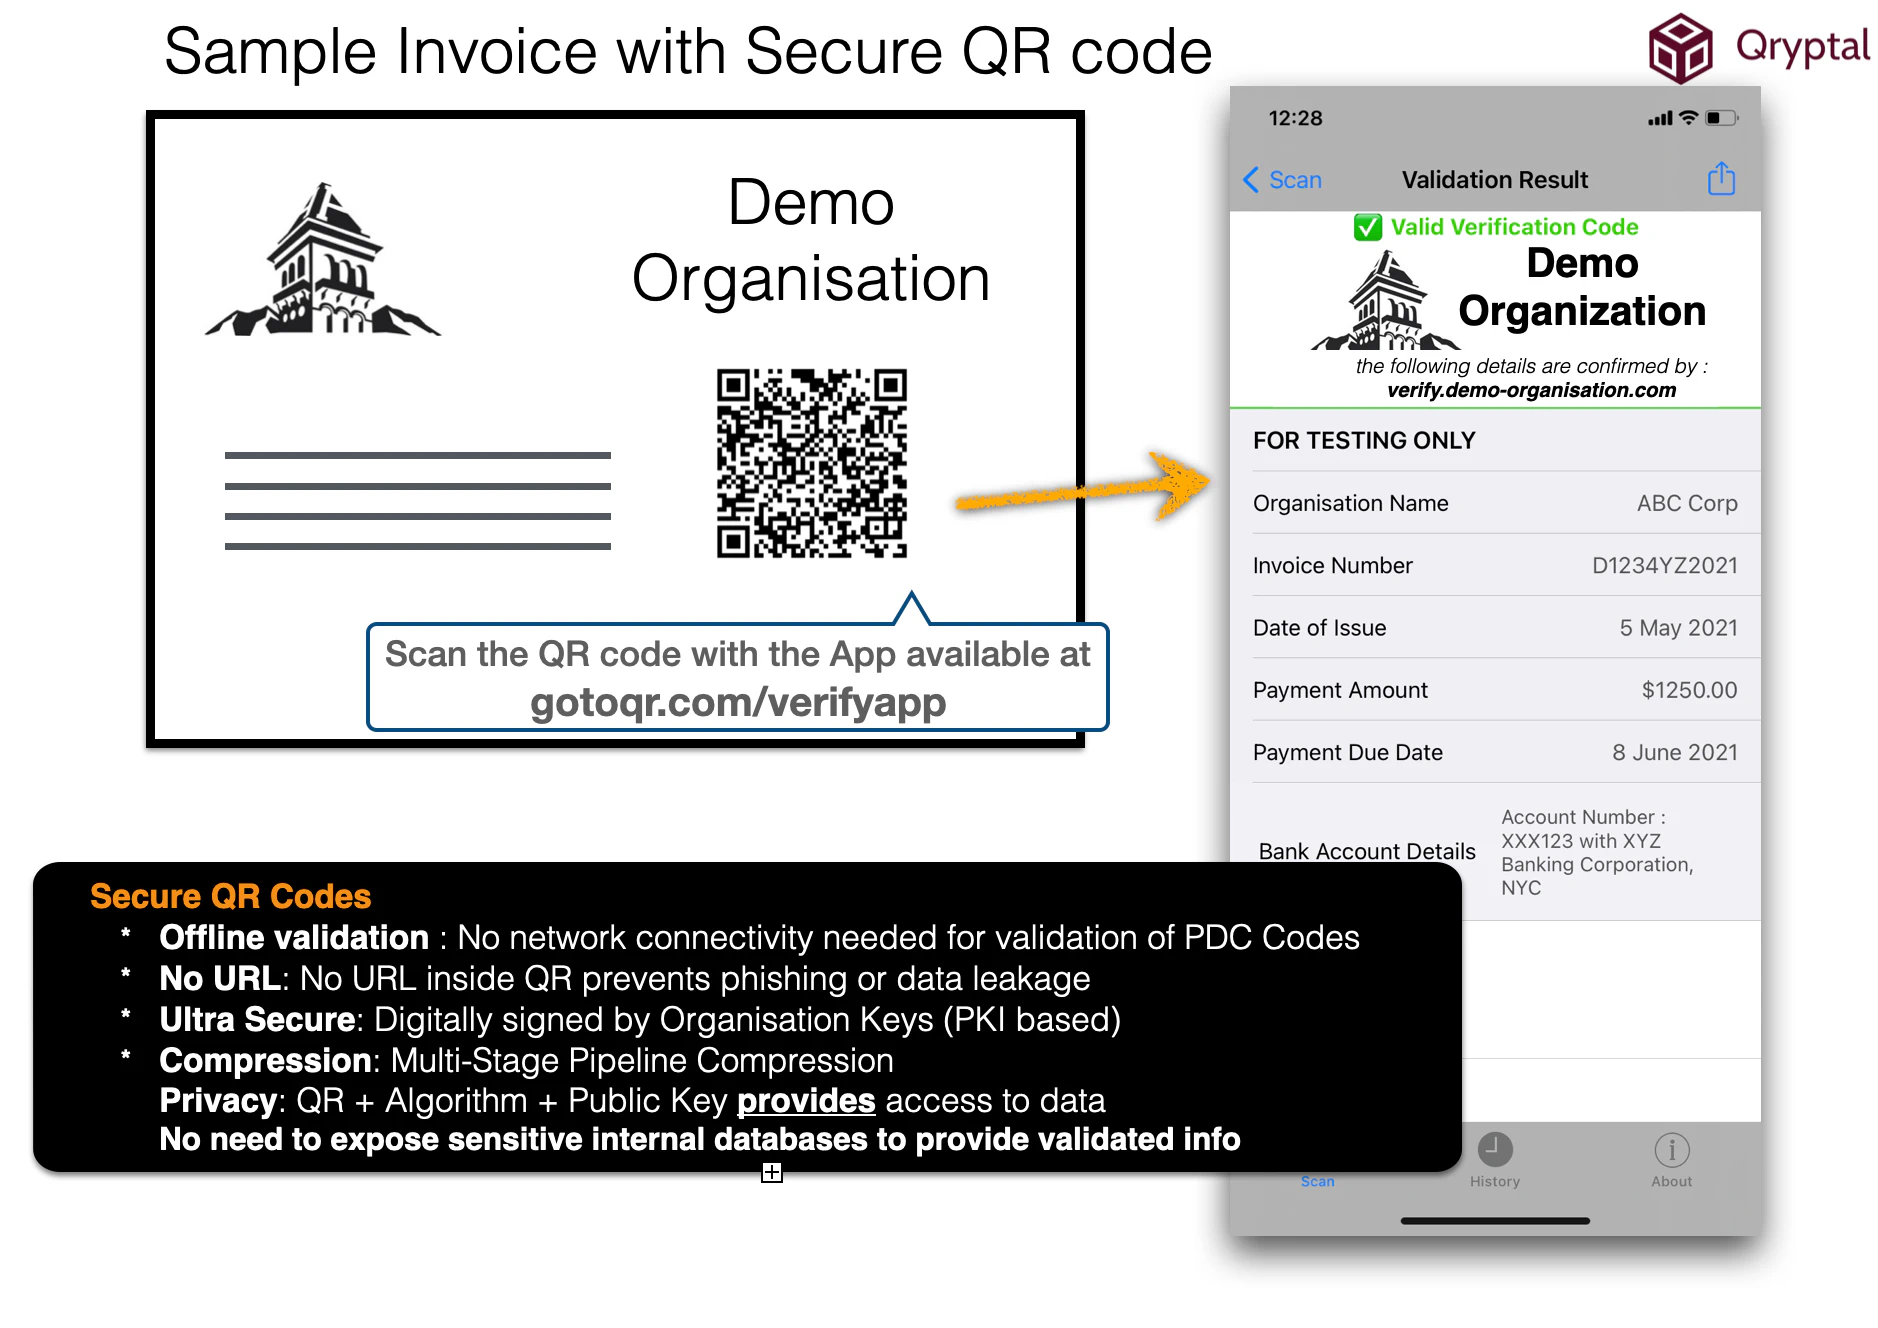 Sample e-invoice with secure QR code